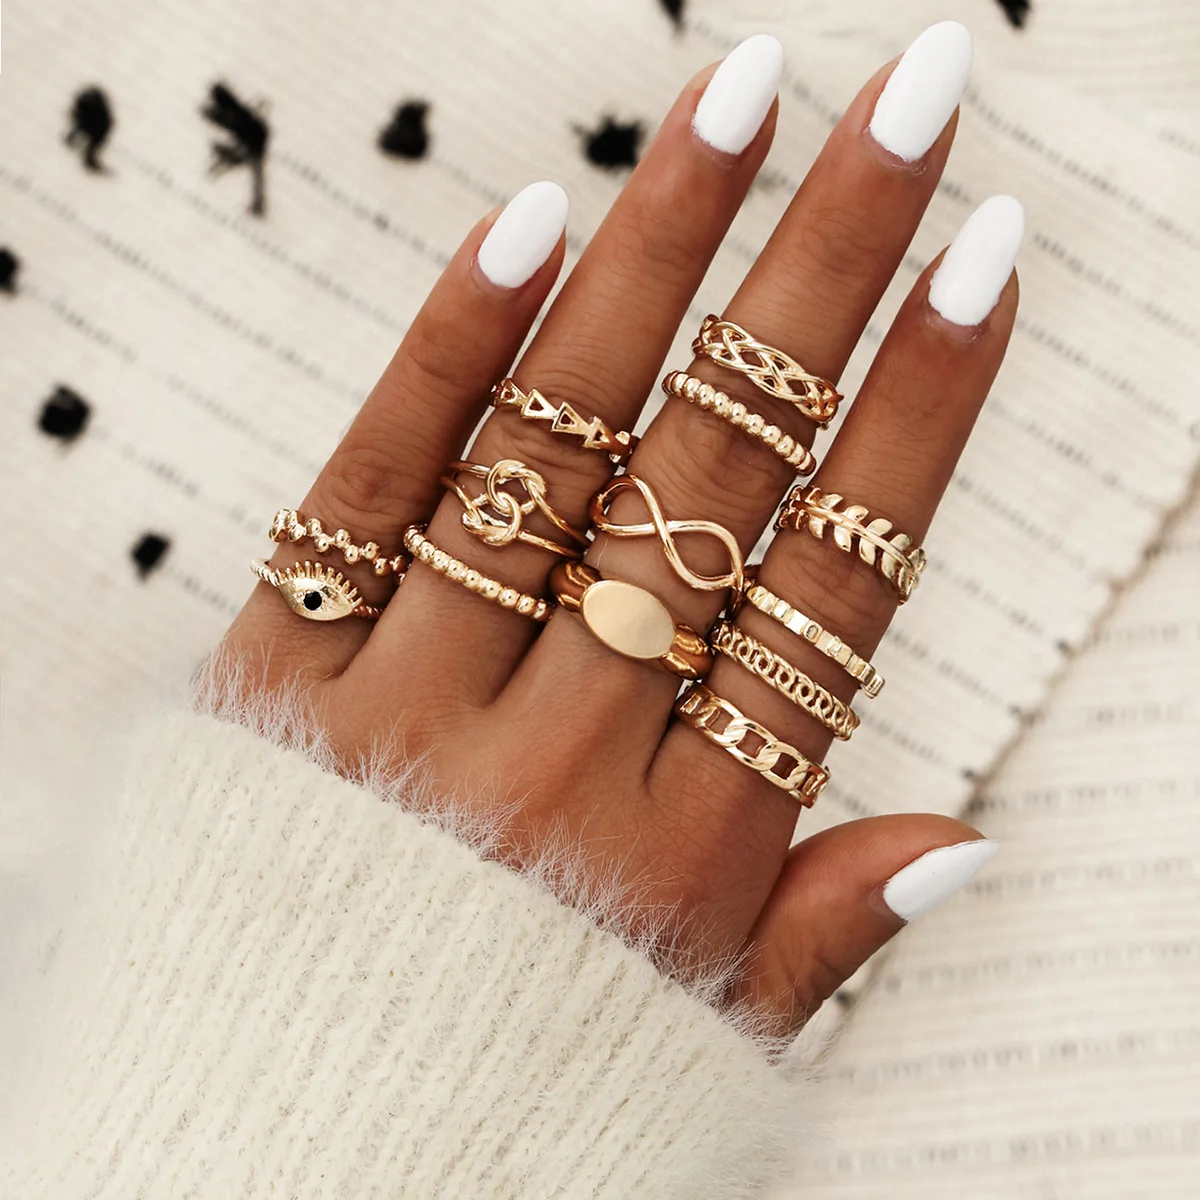 

New Fashion 13Pcs Gold Plated Knotted Link Chain Knuckle Ring Retro Geometric Evil Eyes Ring Set For Woman, As picture show